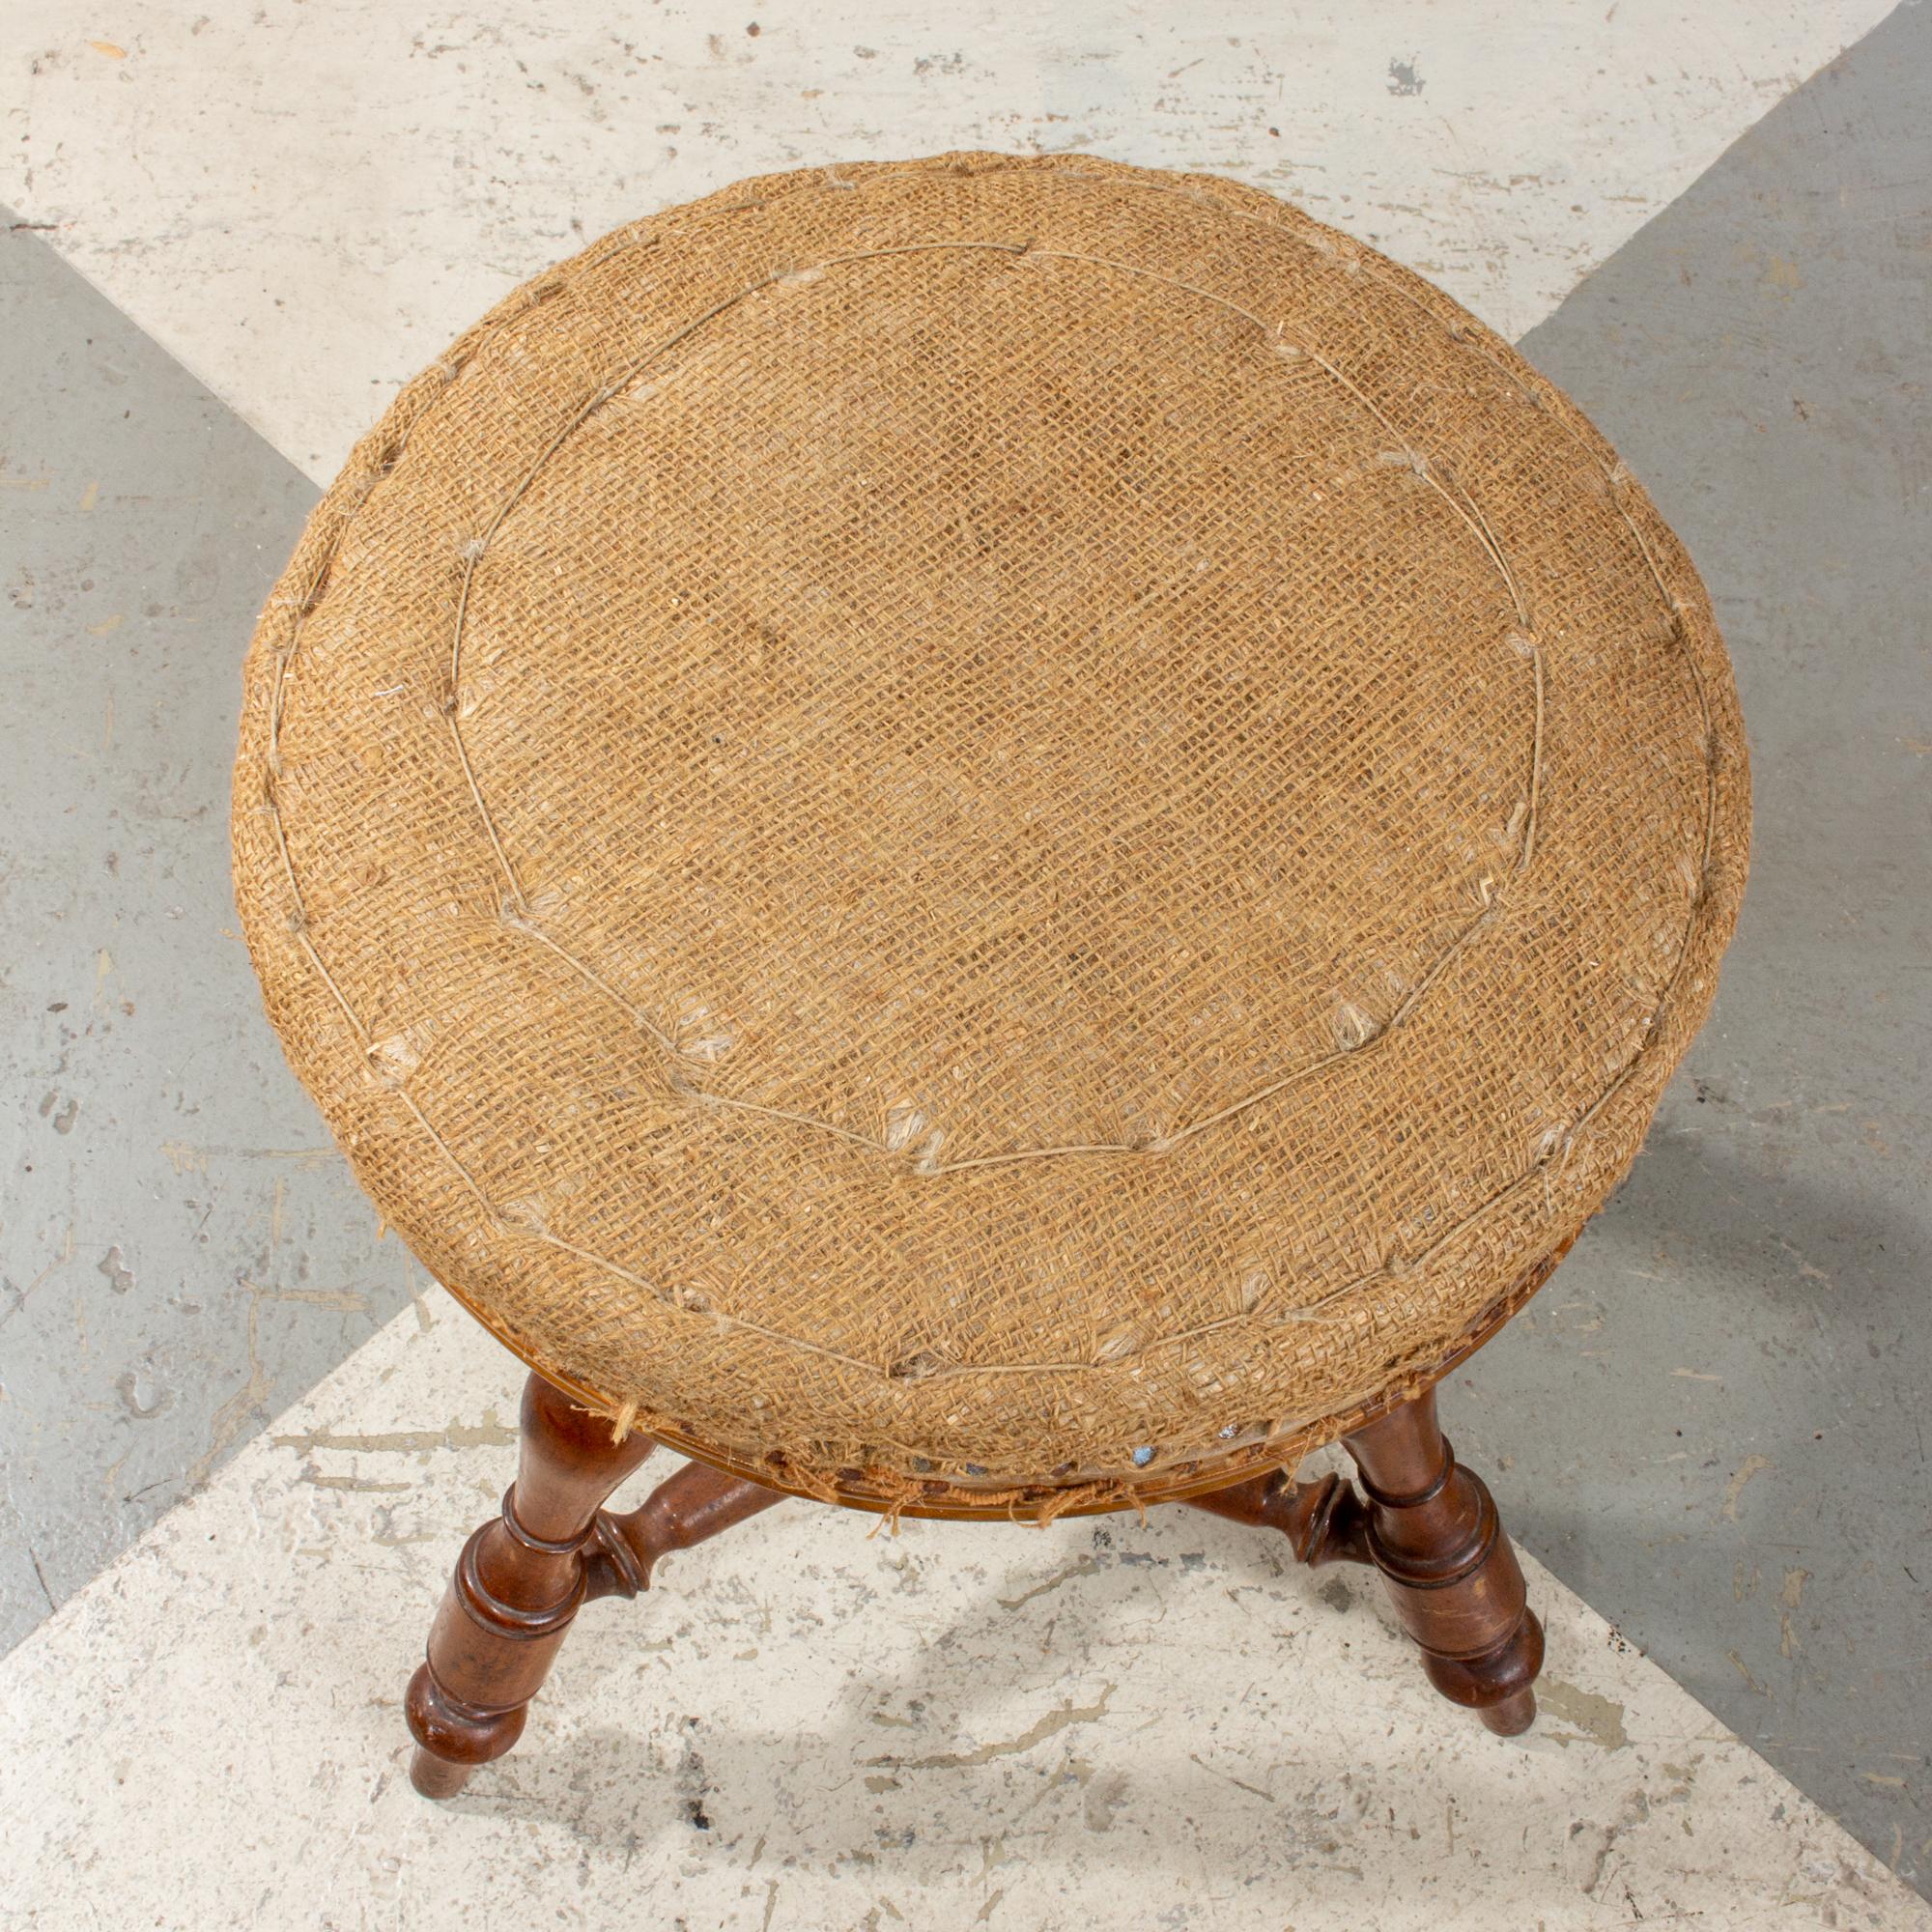 This antique French carved wood stool features an adjustable height top that swivels. Three turned legs with decoration surrounding the mechanism that turns to adjust the height up or down. The upholstery has been removed, so you can see the